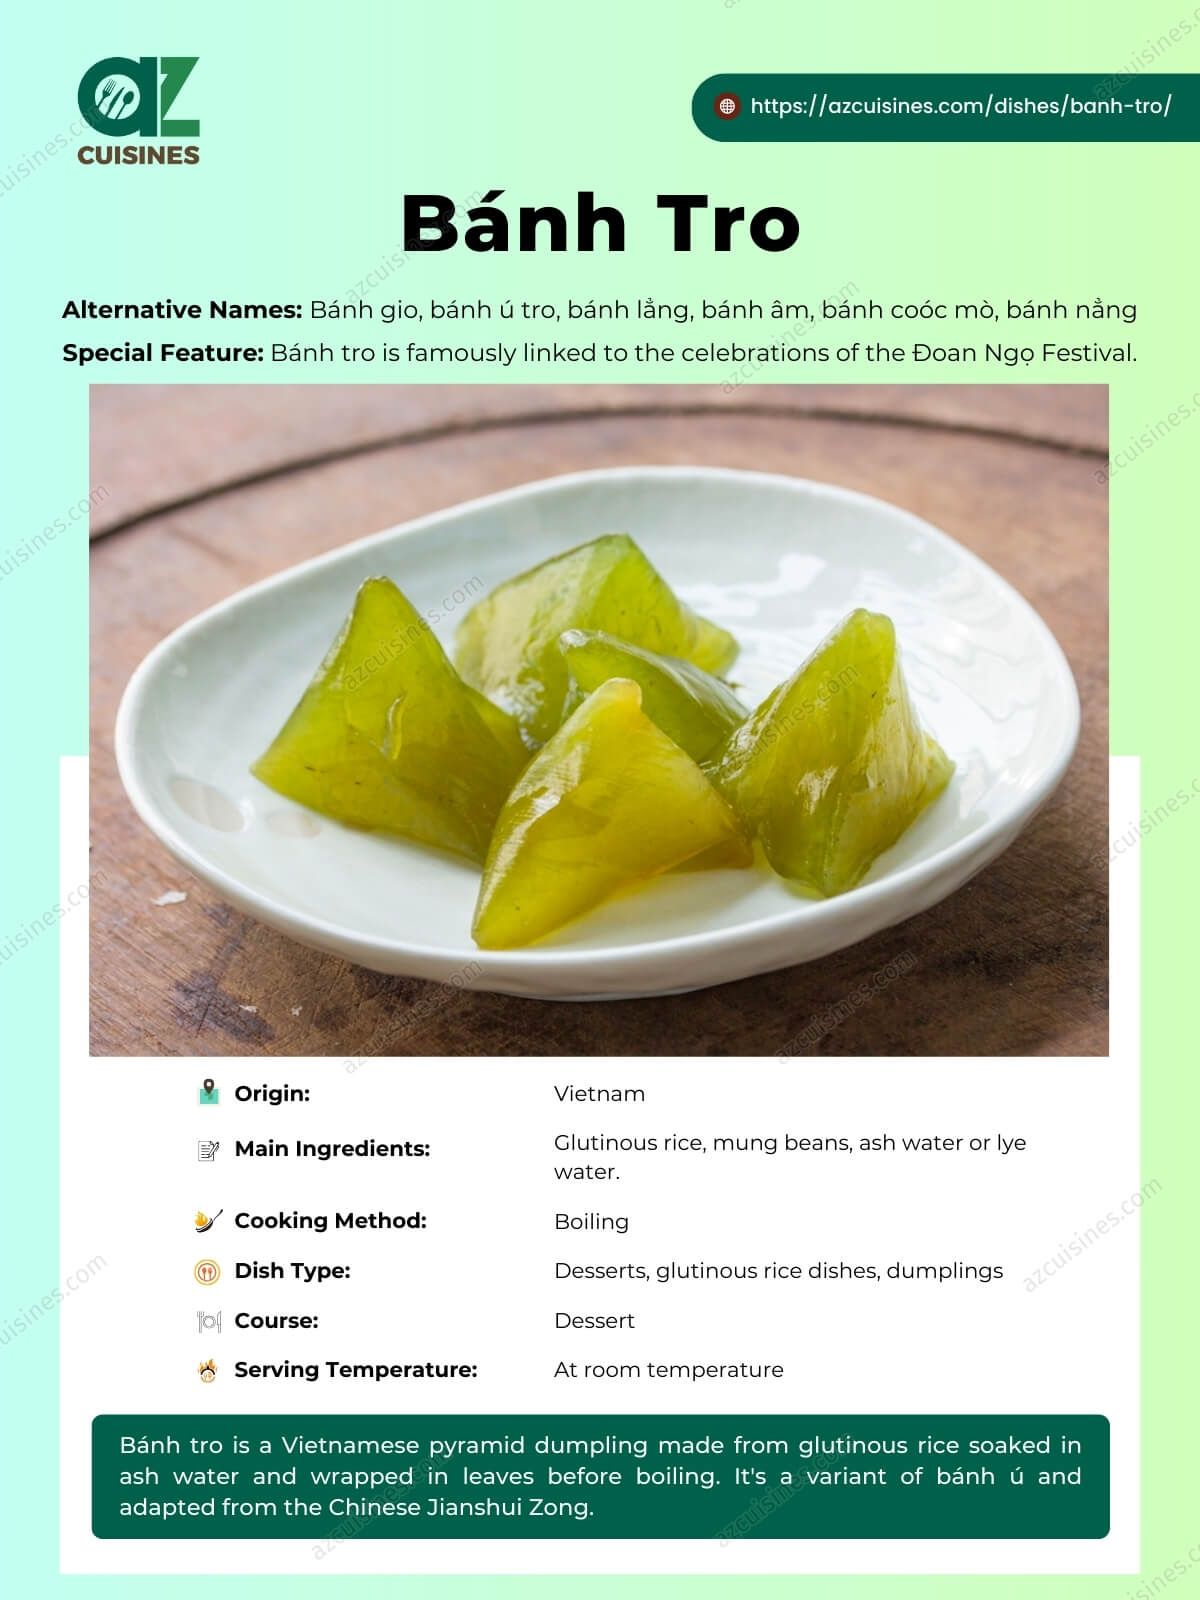 Banh Tro Overview